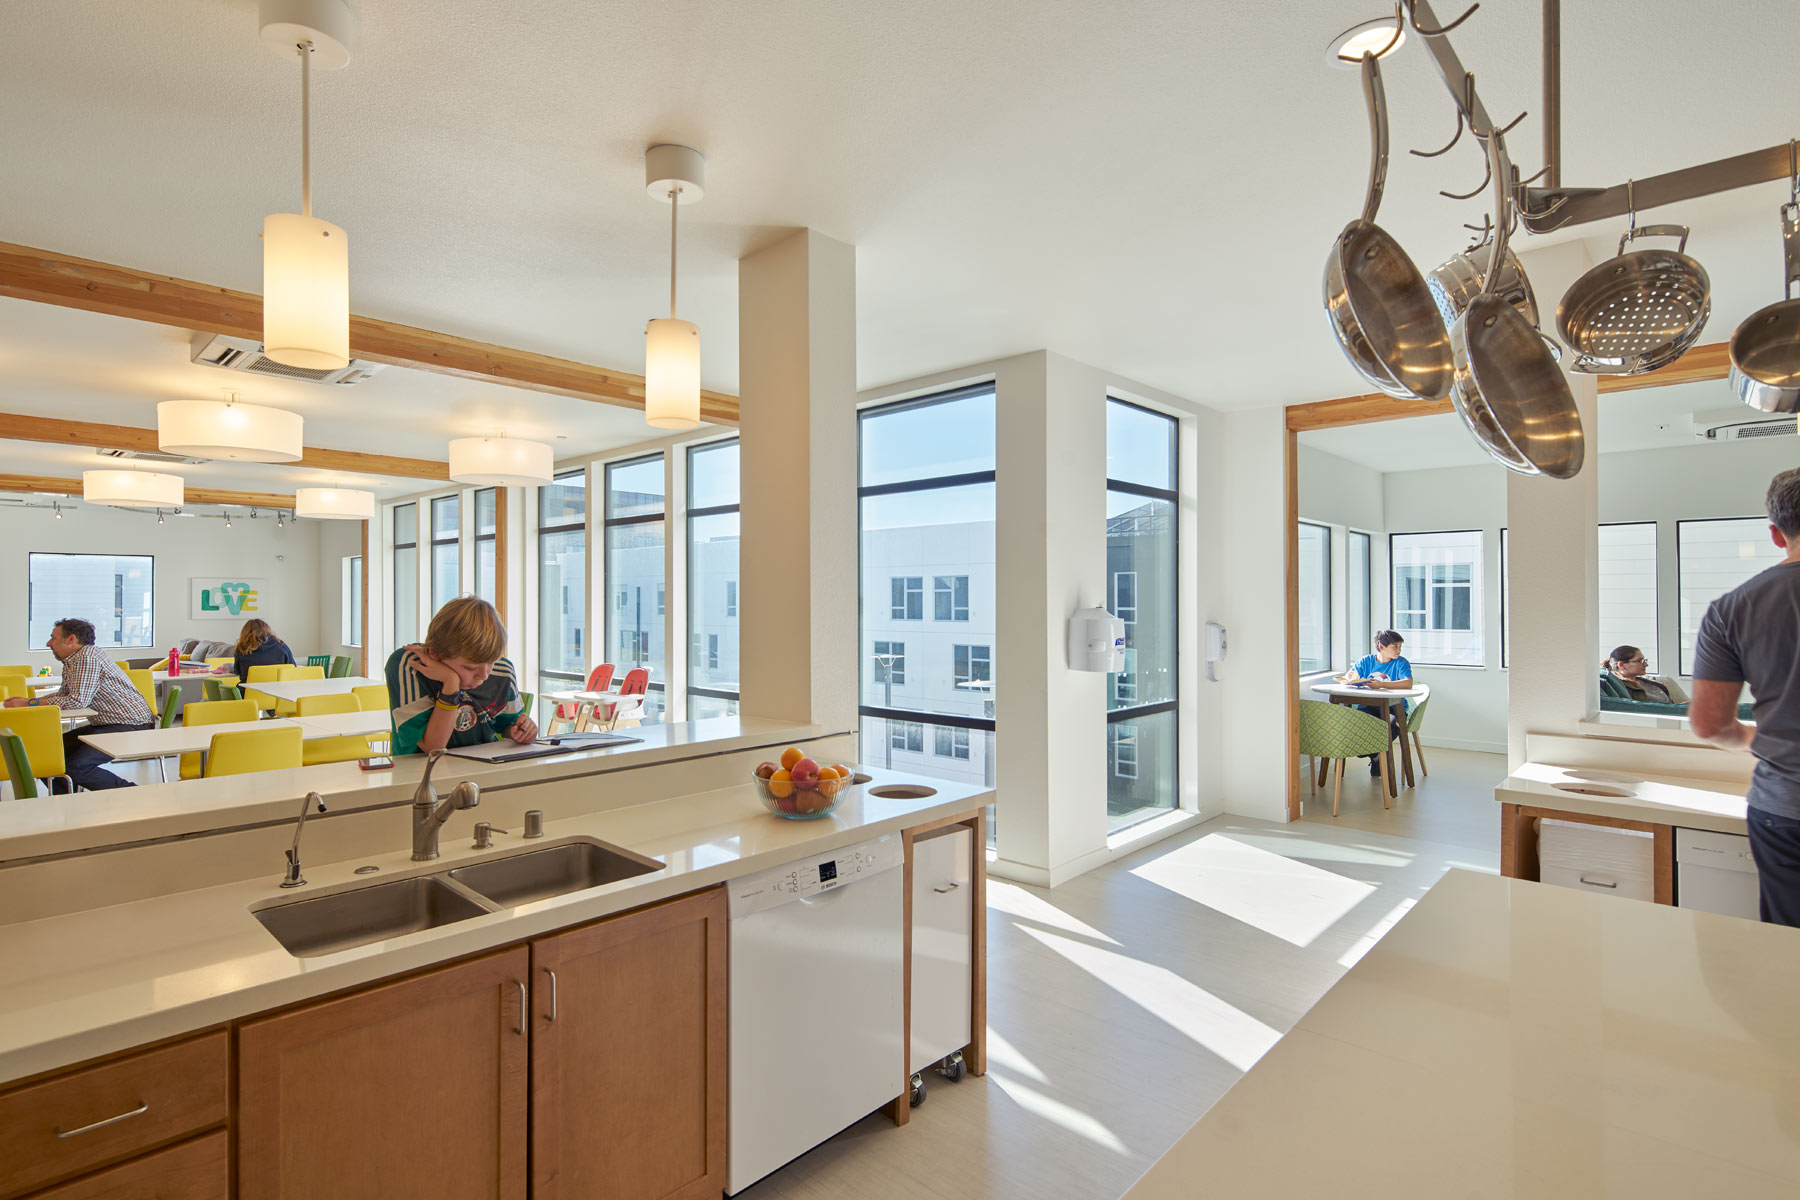 The Nancy and Stephen Grand Family House is a LEED Platinum certified home that provides a comforting, supportive, and sustainably healthy environment for families whose children are being treated at the nearby UC San Francisco Benioff Children’s Hospital.